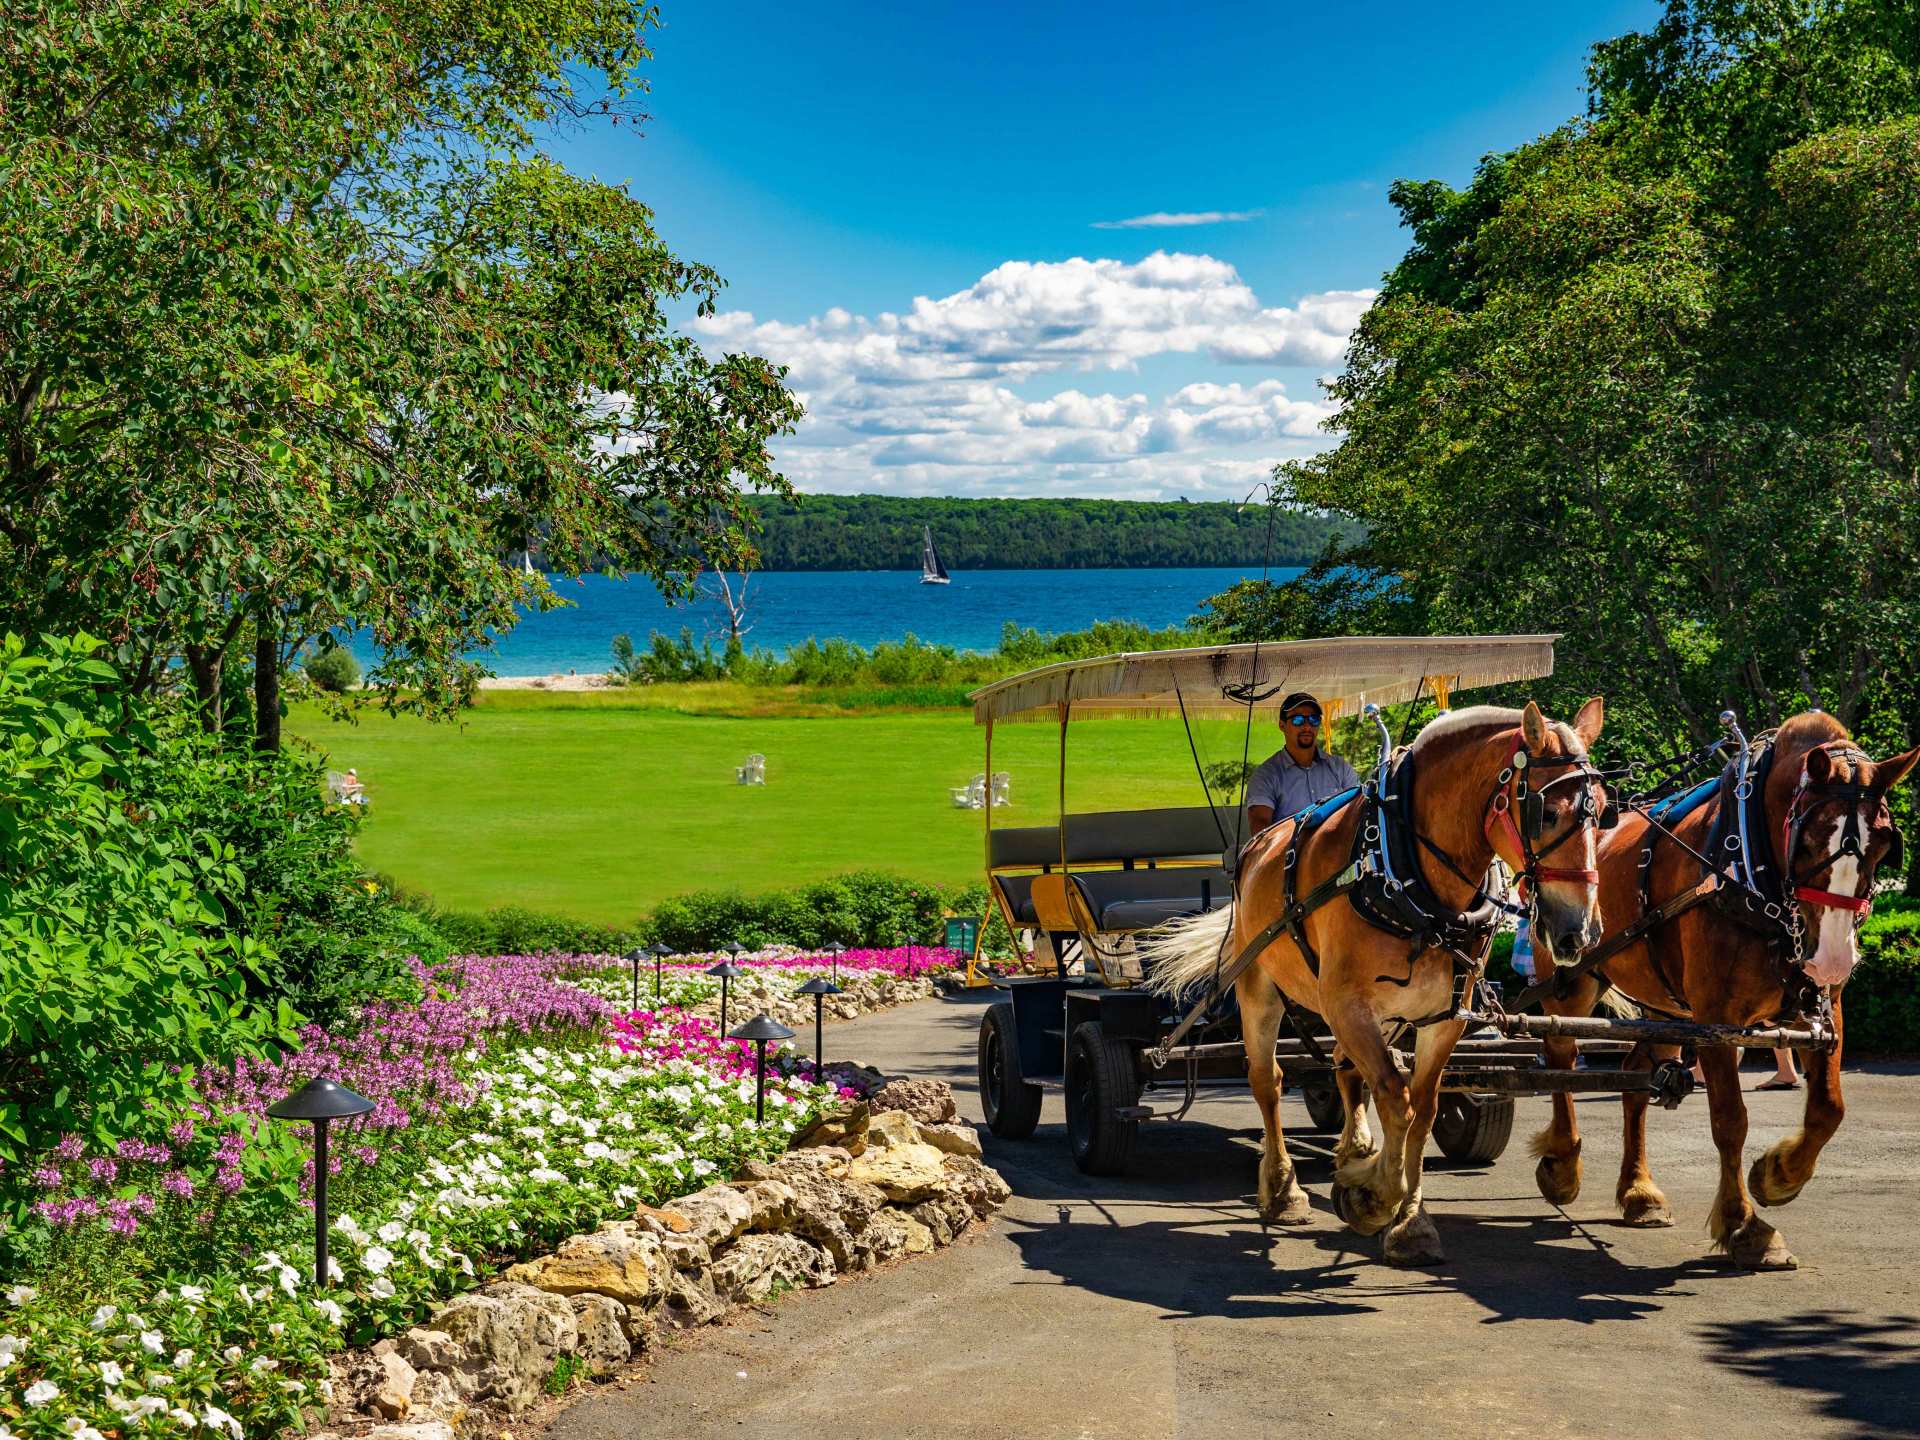 Mission Point resort | A horse and carriage at Mission Point resort on Mackinac Island